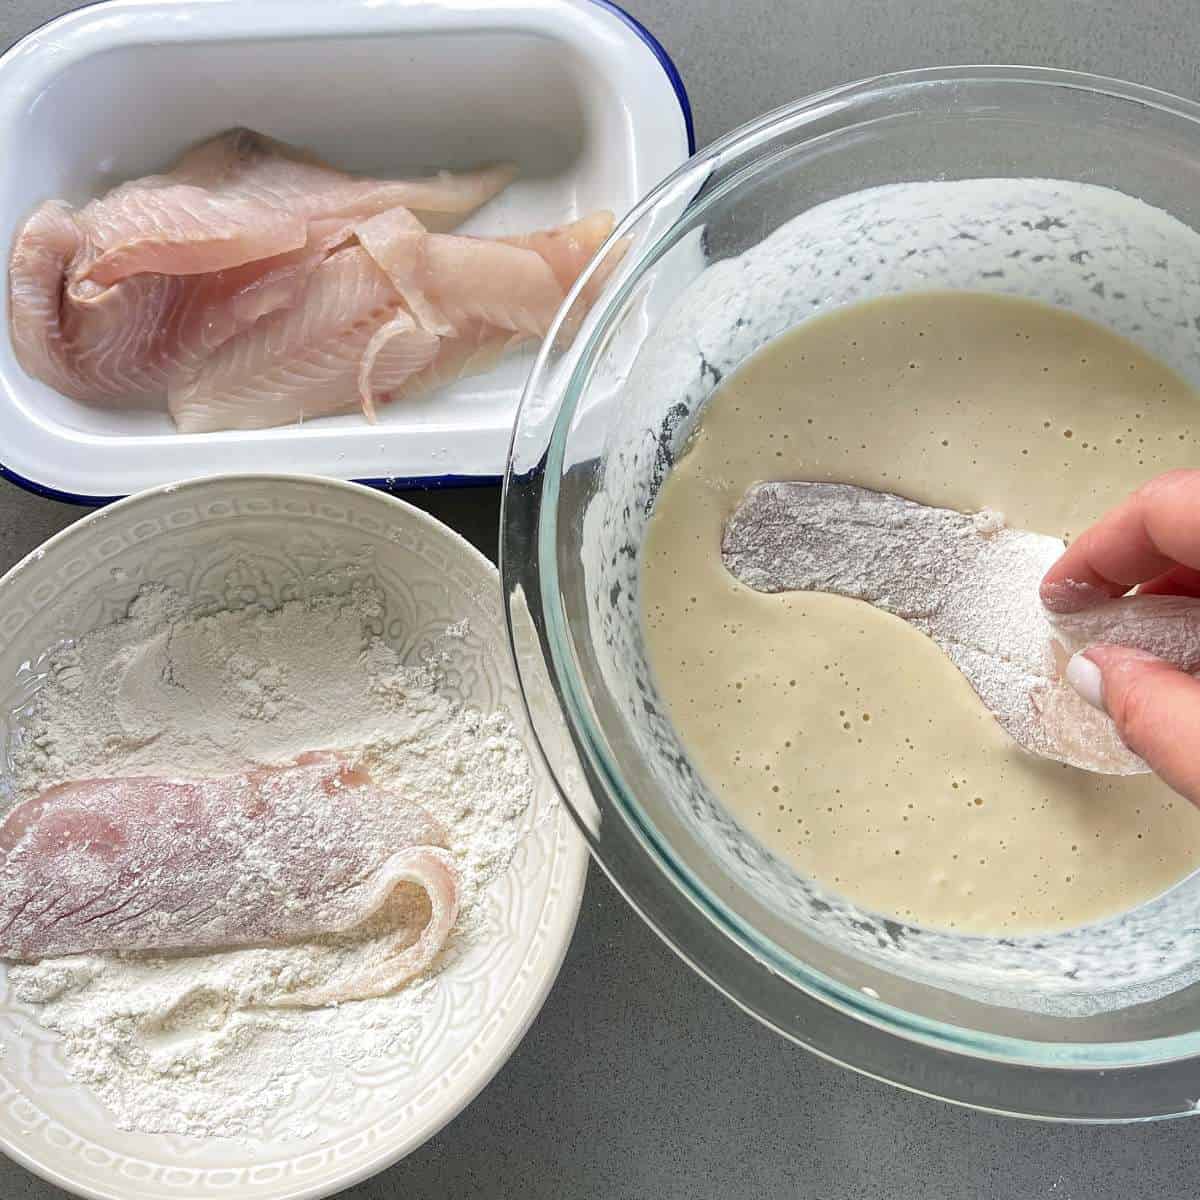 Showing the process of battering the fish for the battered fish burgers. One bowl of flour, one bowl of batter and one dish of fish.